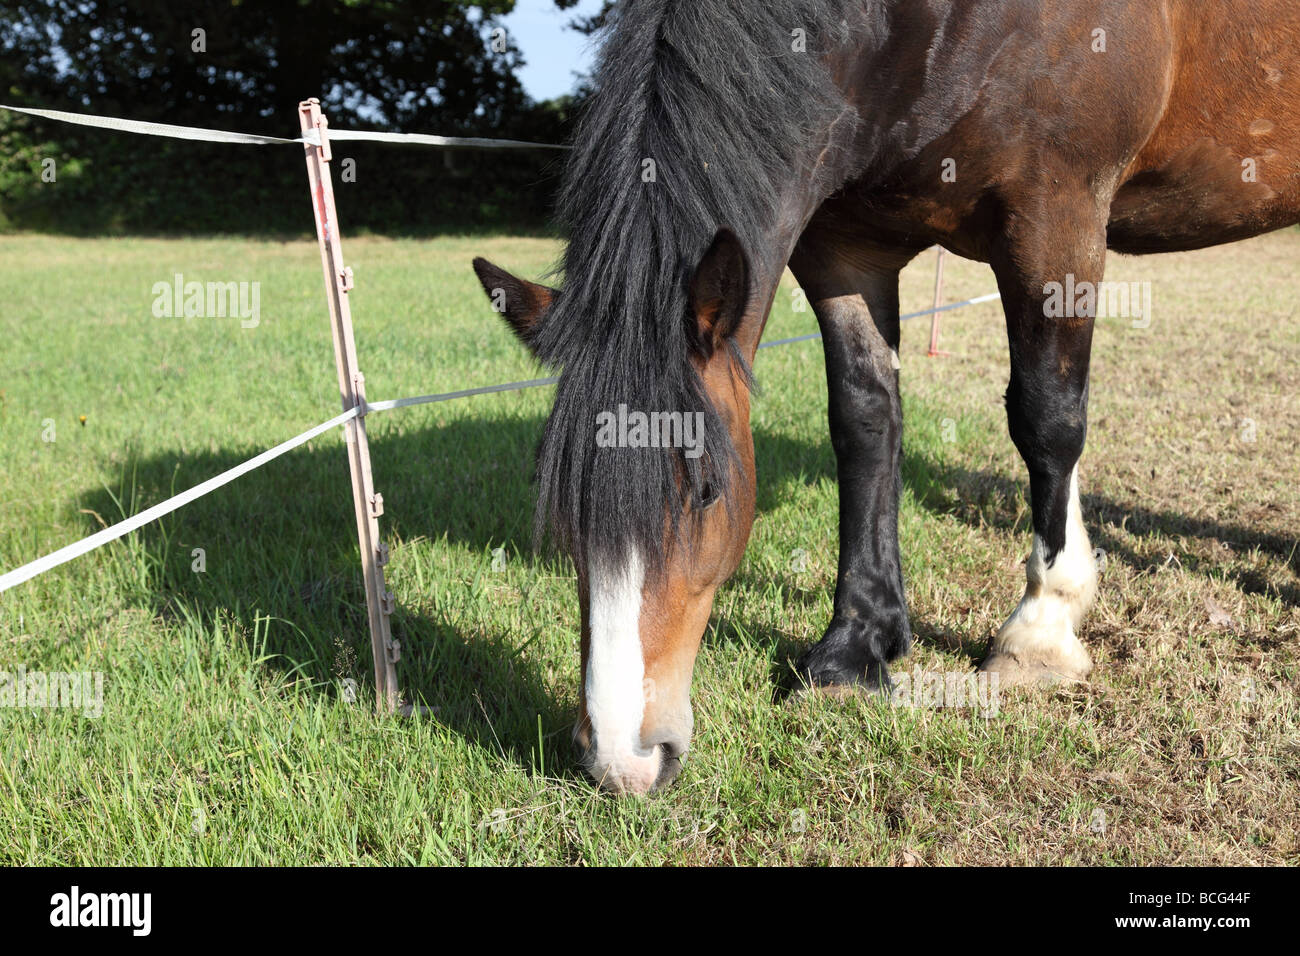 Temporary moveable electric fencing being used to restrict grass grazing for a horse Stock Photo